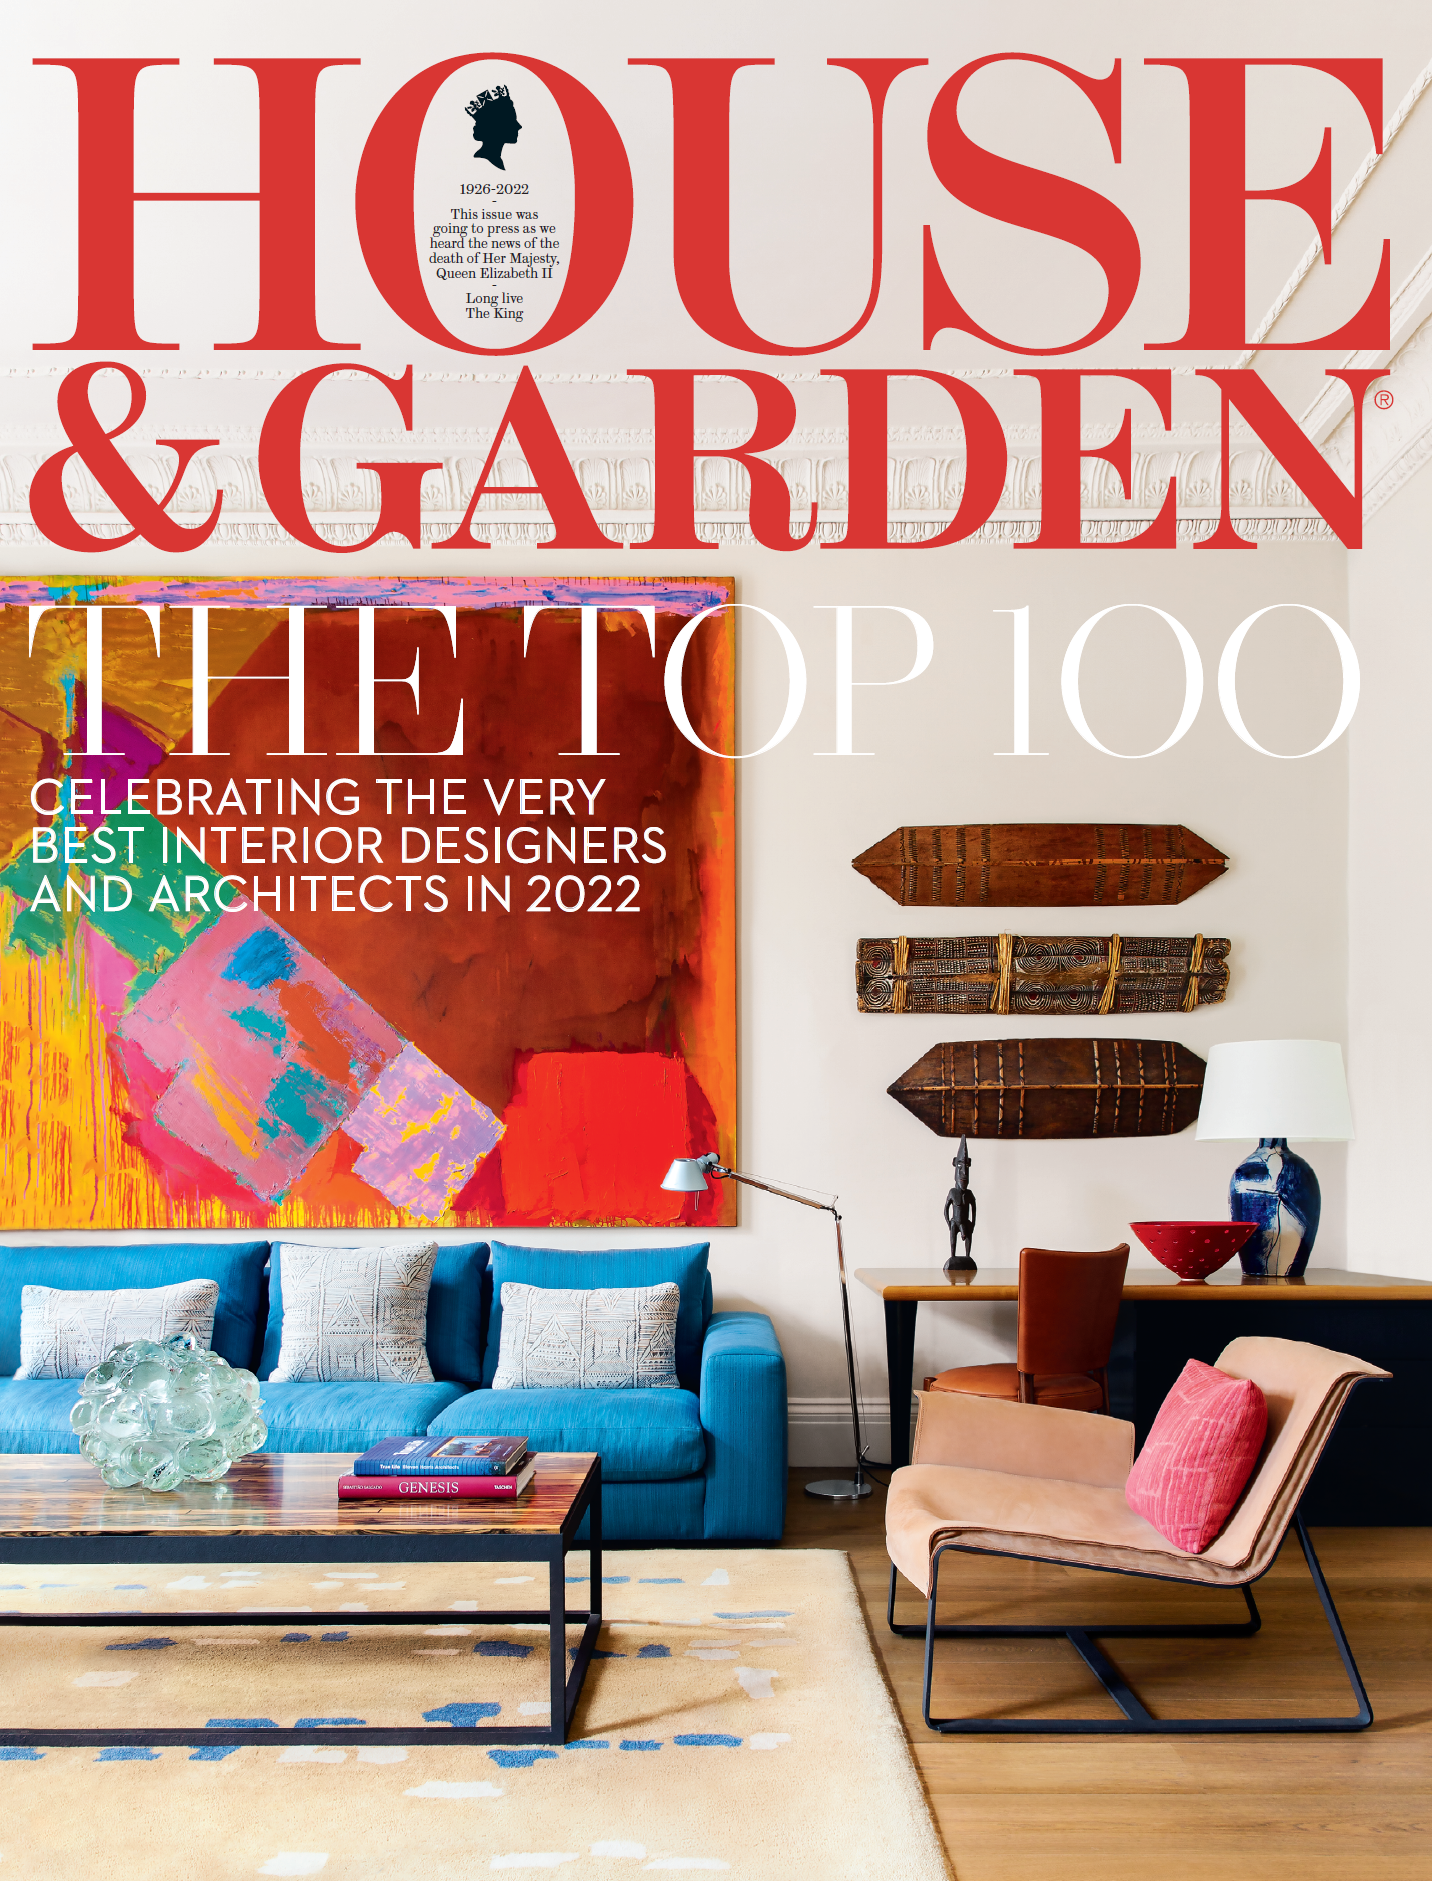 Magazine cover featuring modern living room